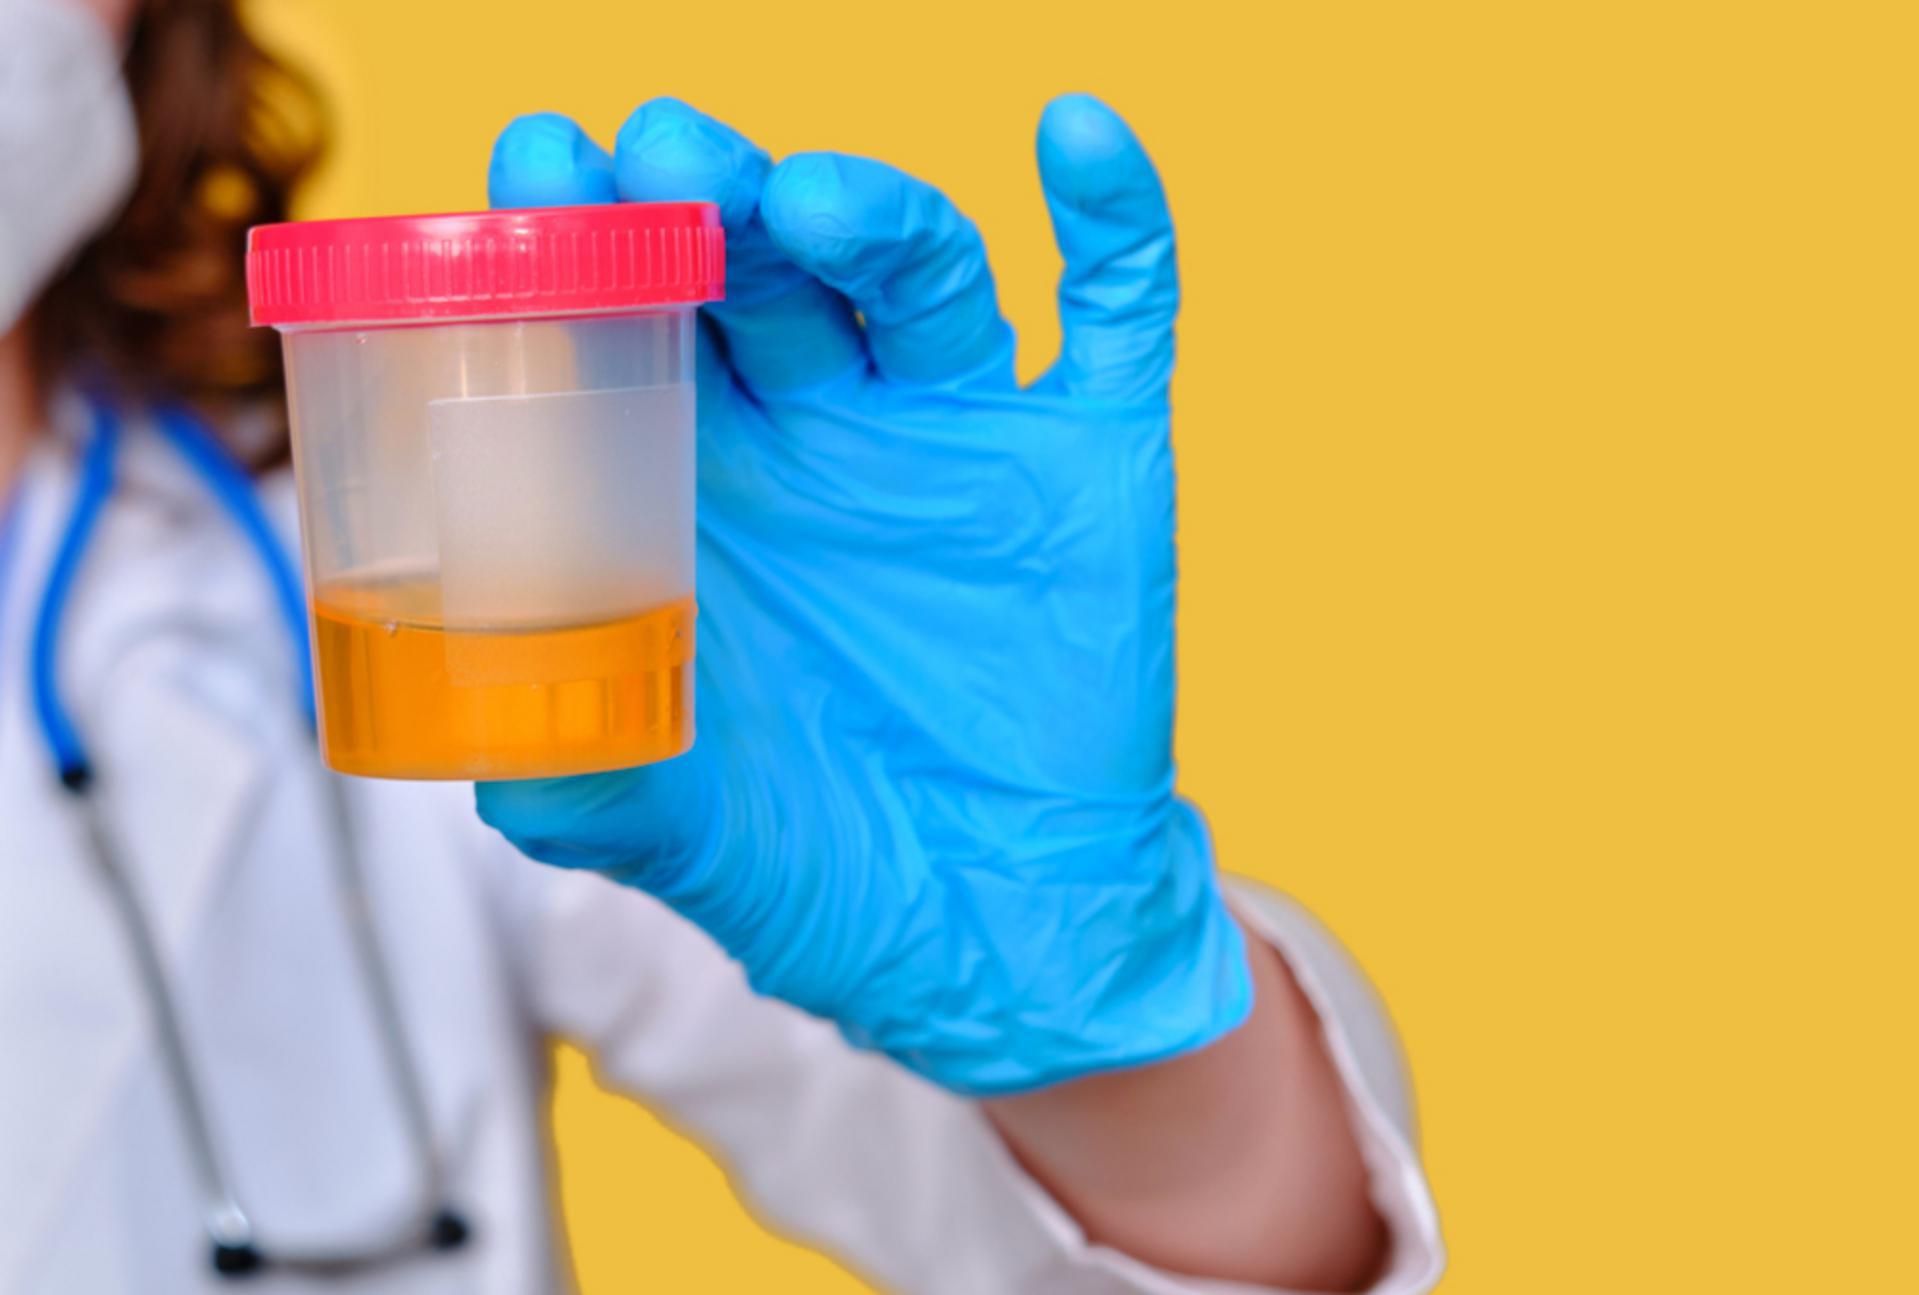 Reasons to Have a Random Drug Testing Policy - featured